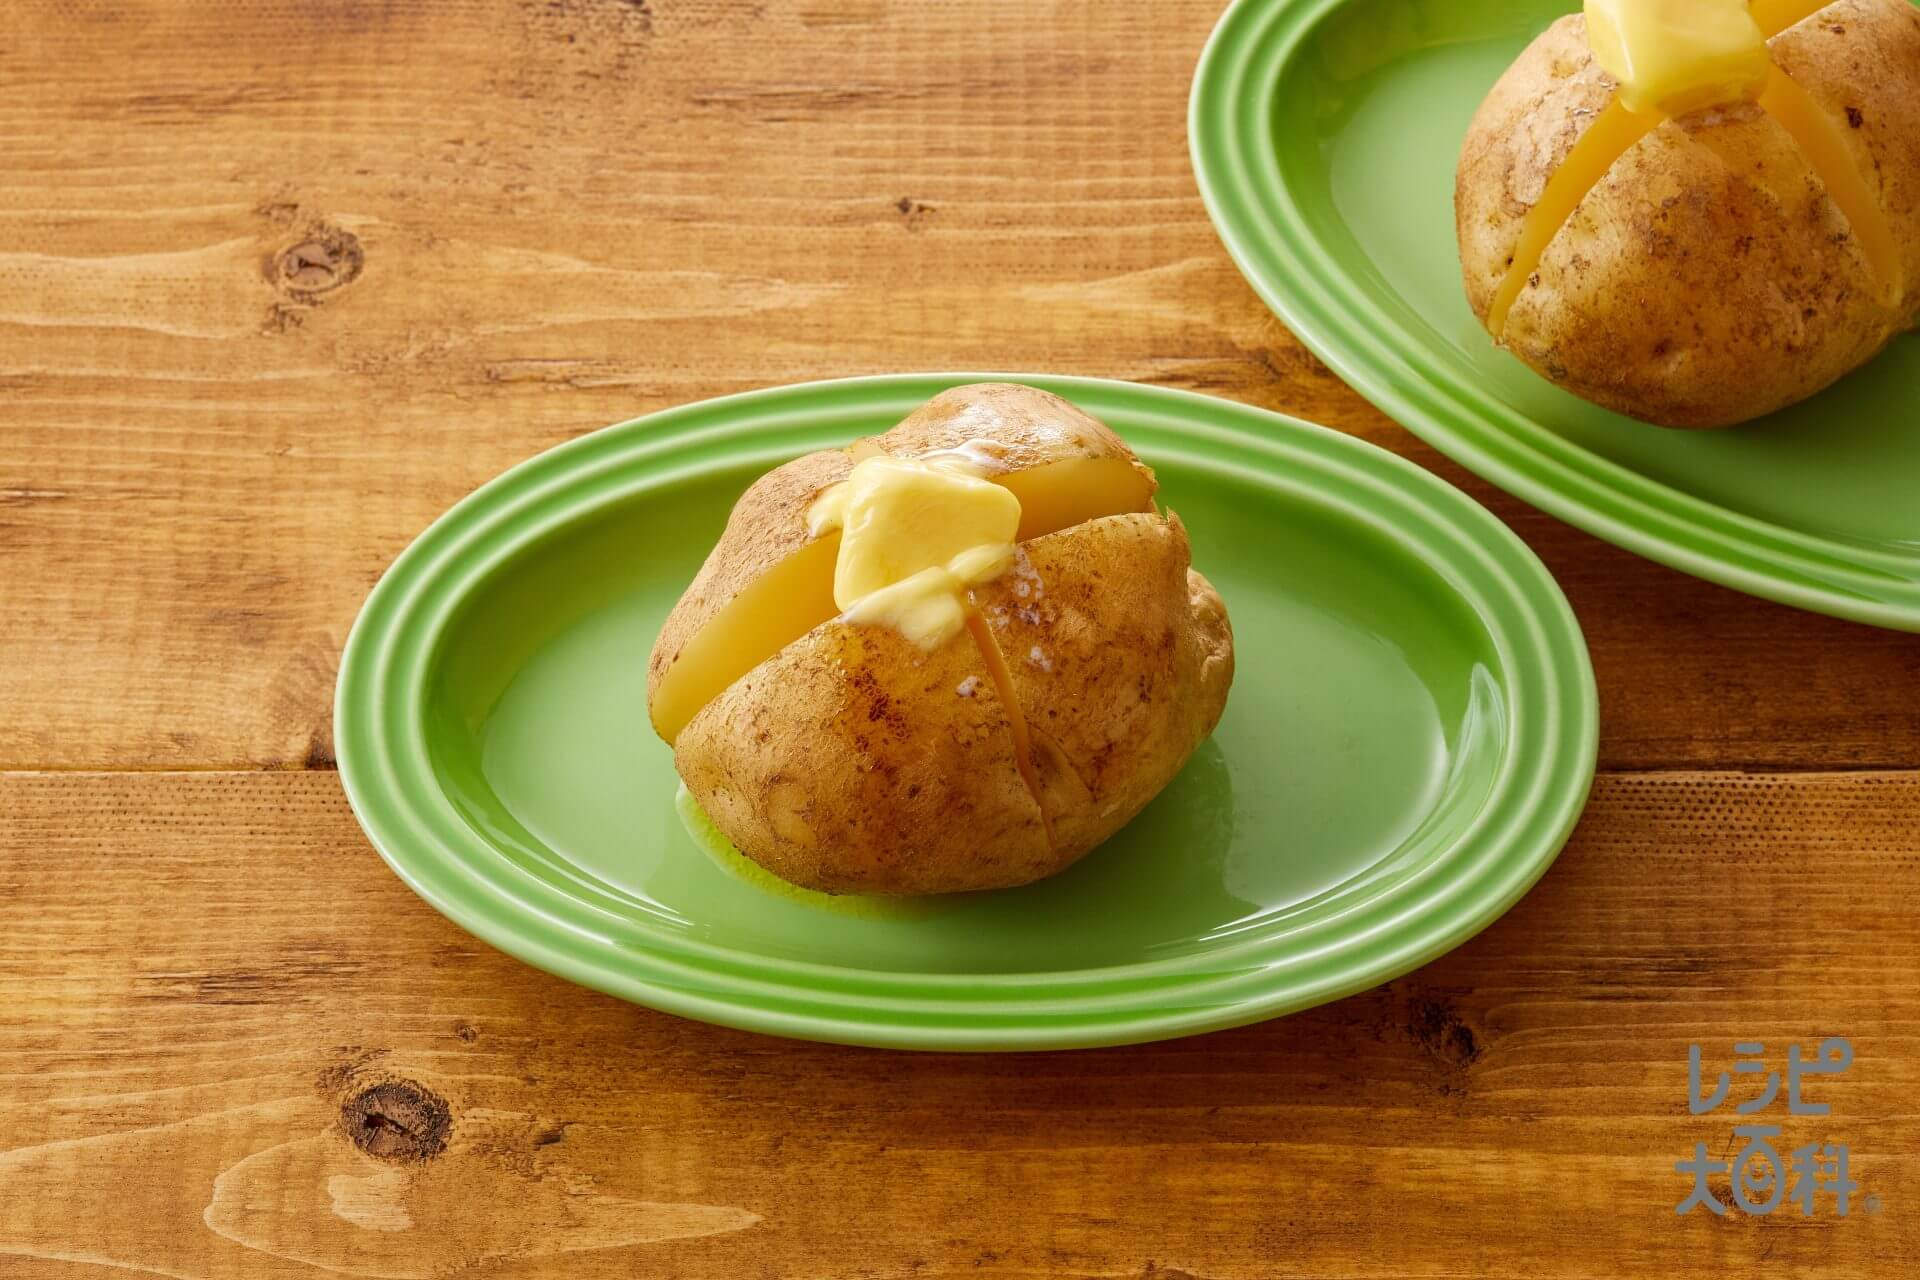 Steamed Potato with Butter and Umami